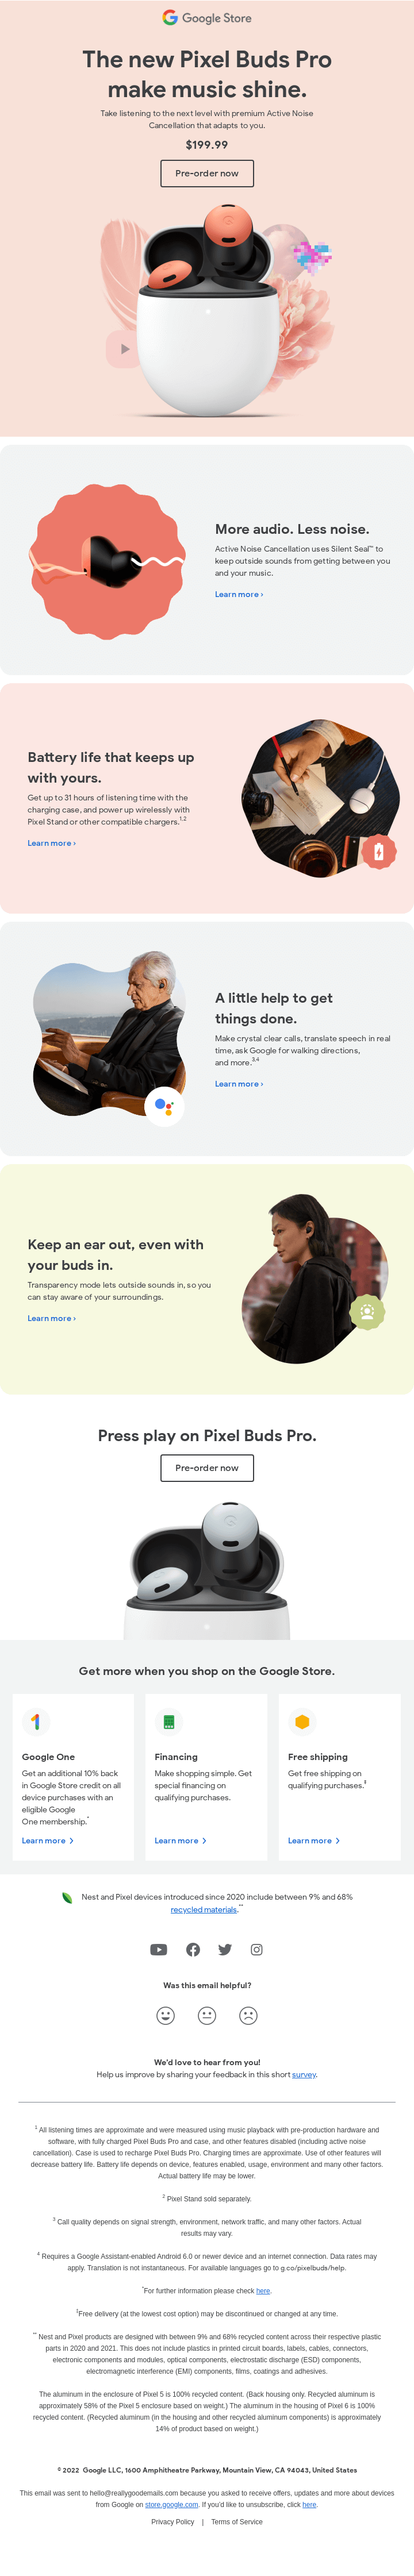 Pre-order Pixel Buds Pro for immersive sound